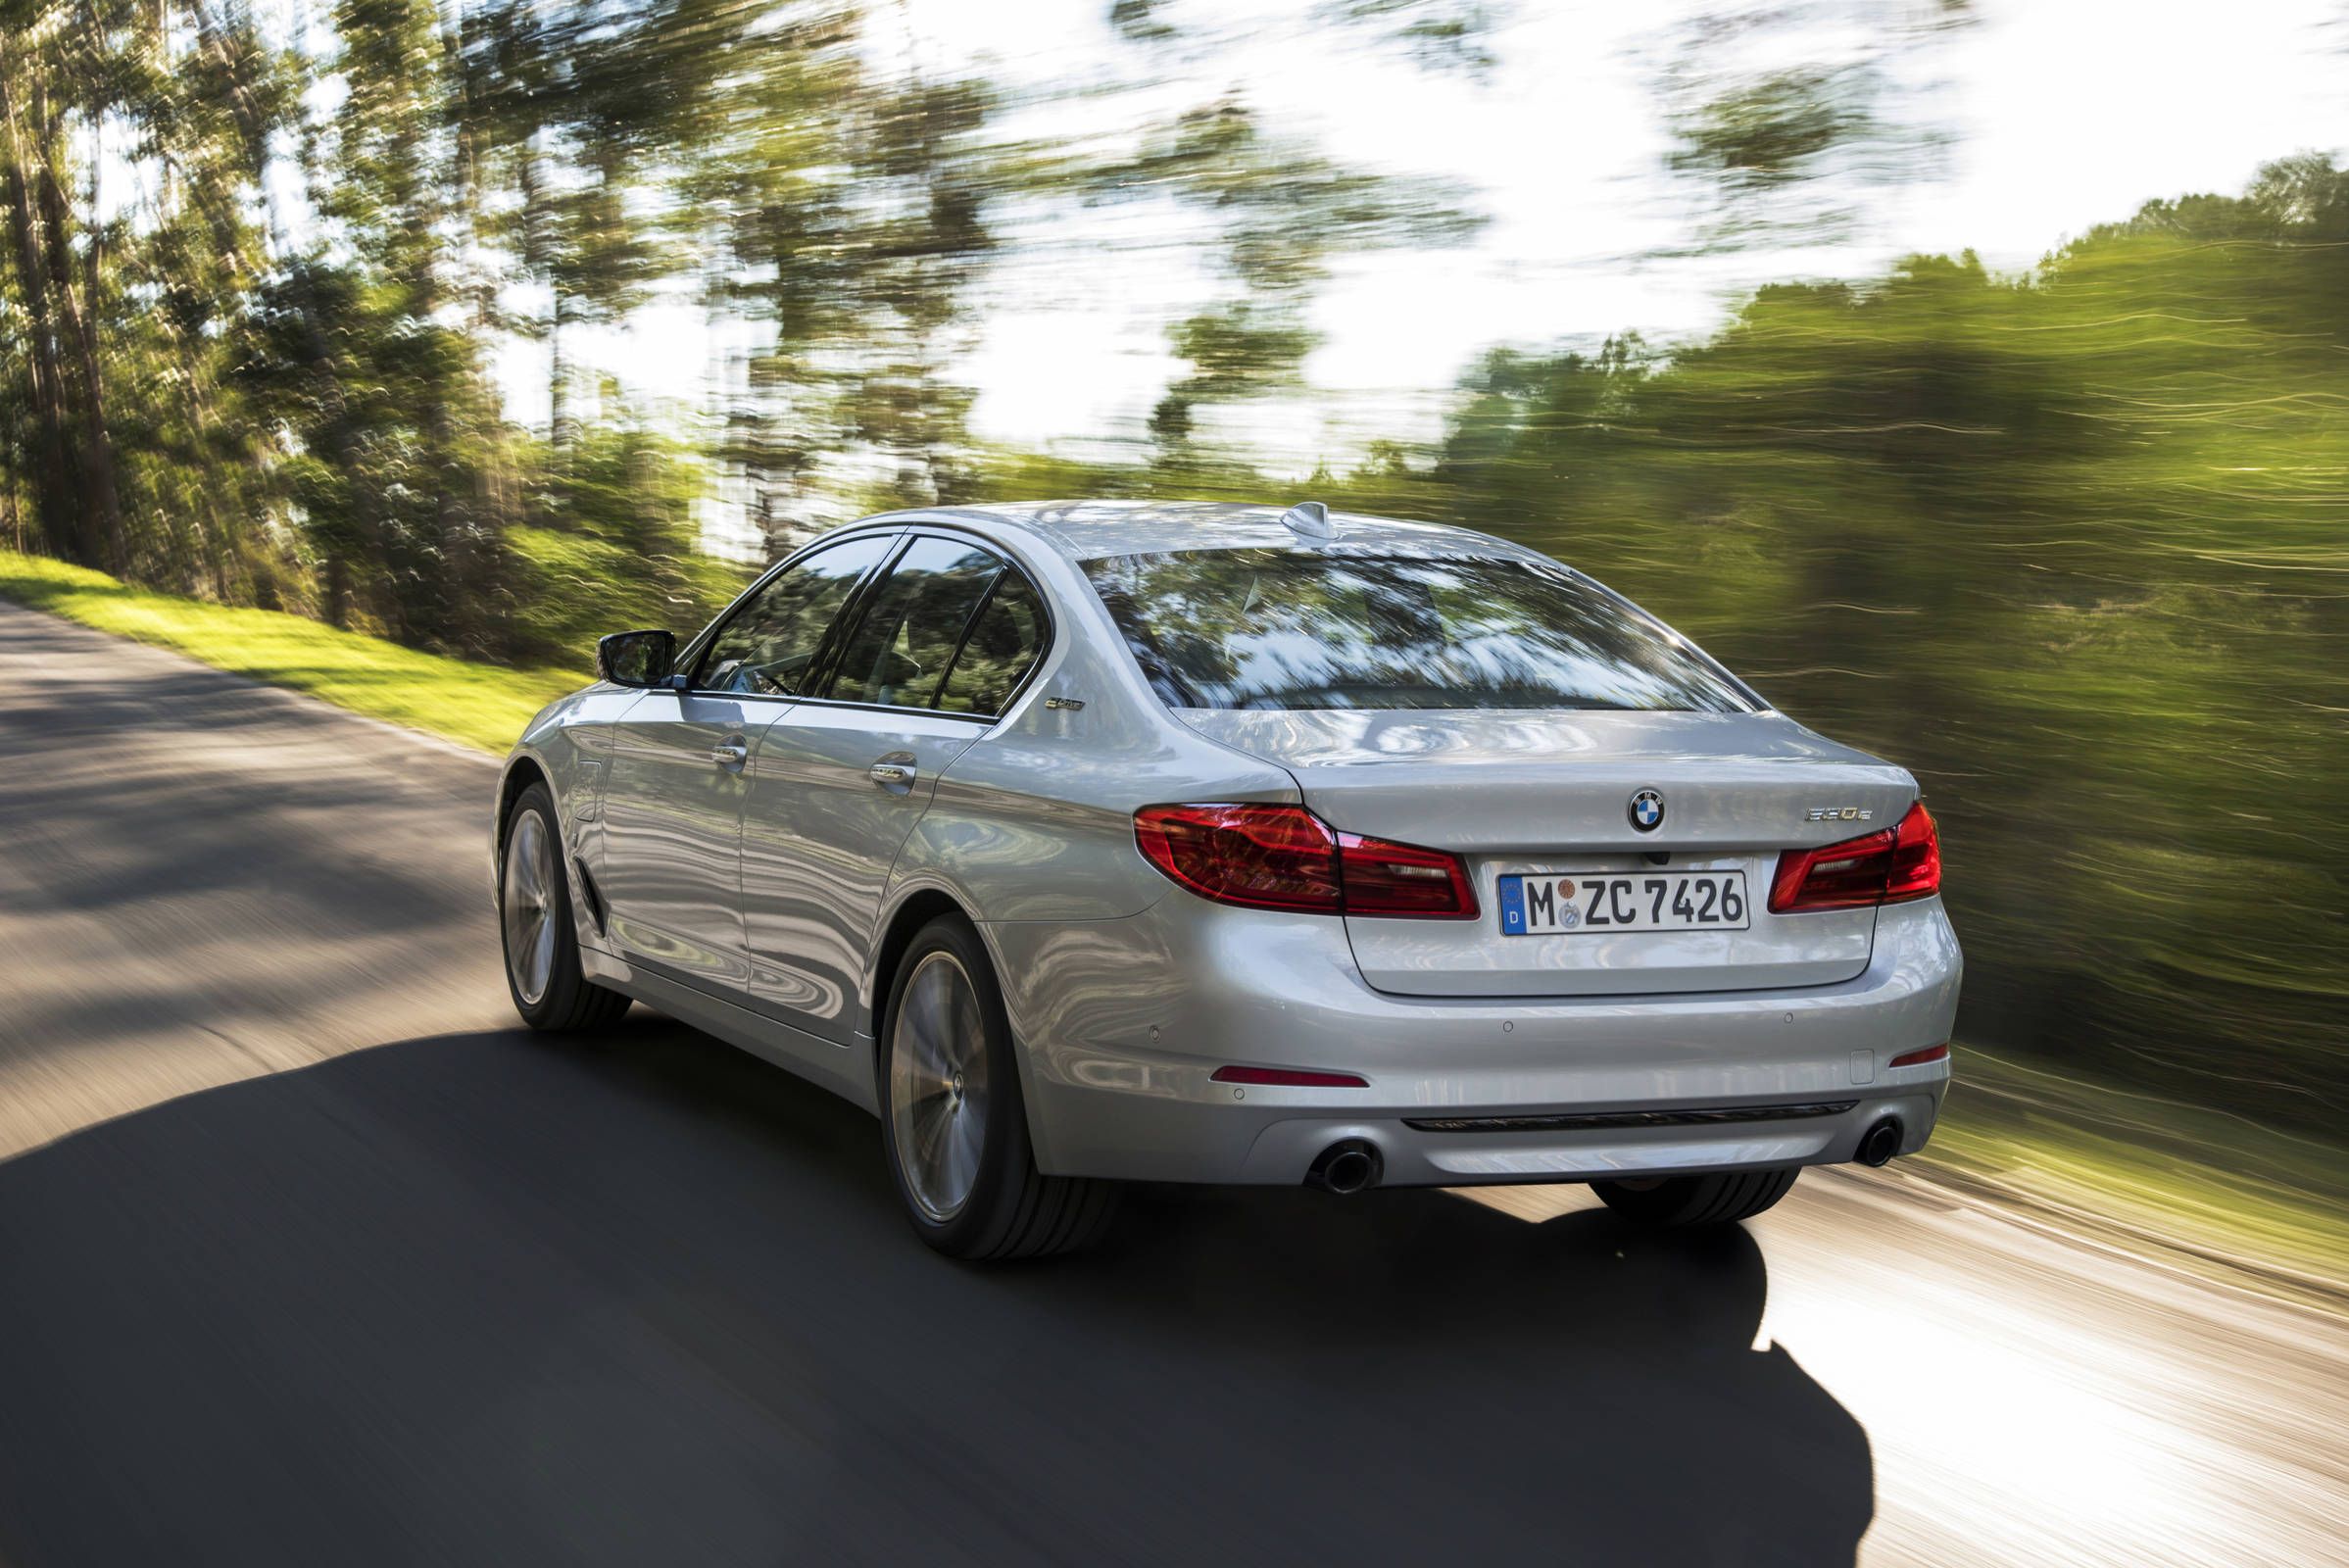 2018 BMW 530e iPerformance essentials: Comfortable and efficient, but is it  “the one to buy?”